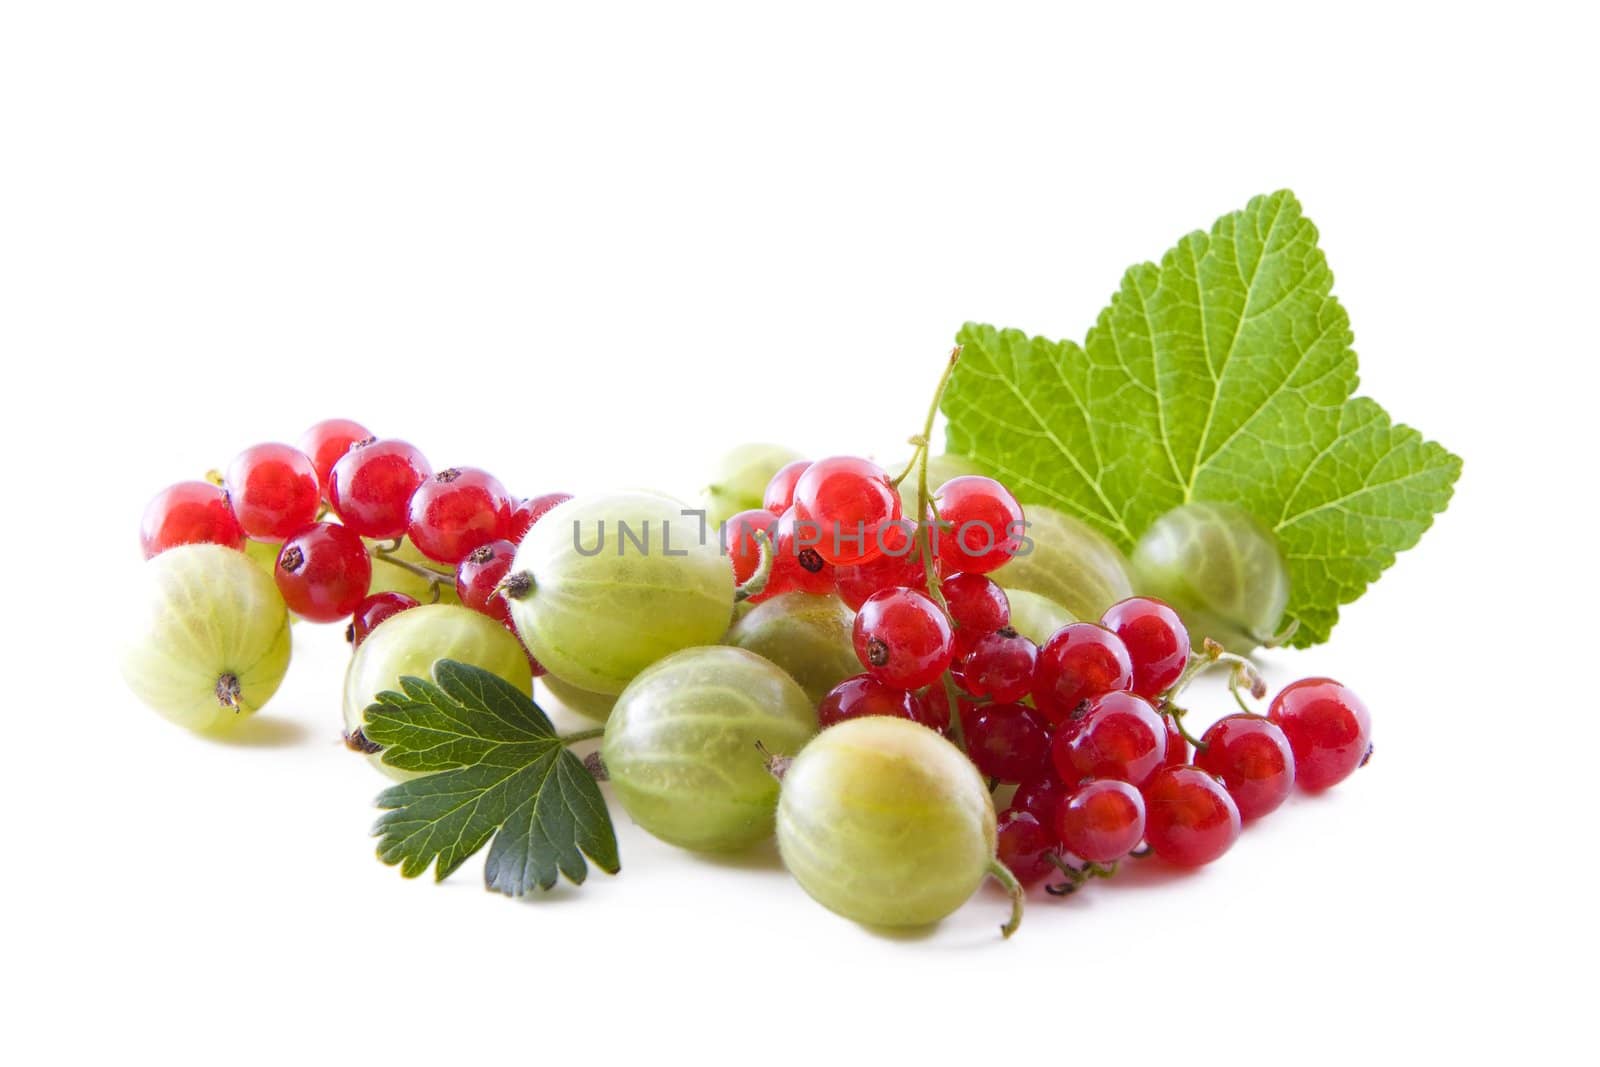 Currants and gooseberry by Gbuglok